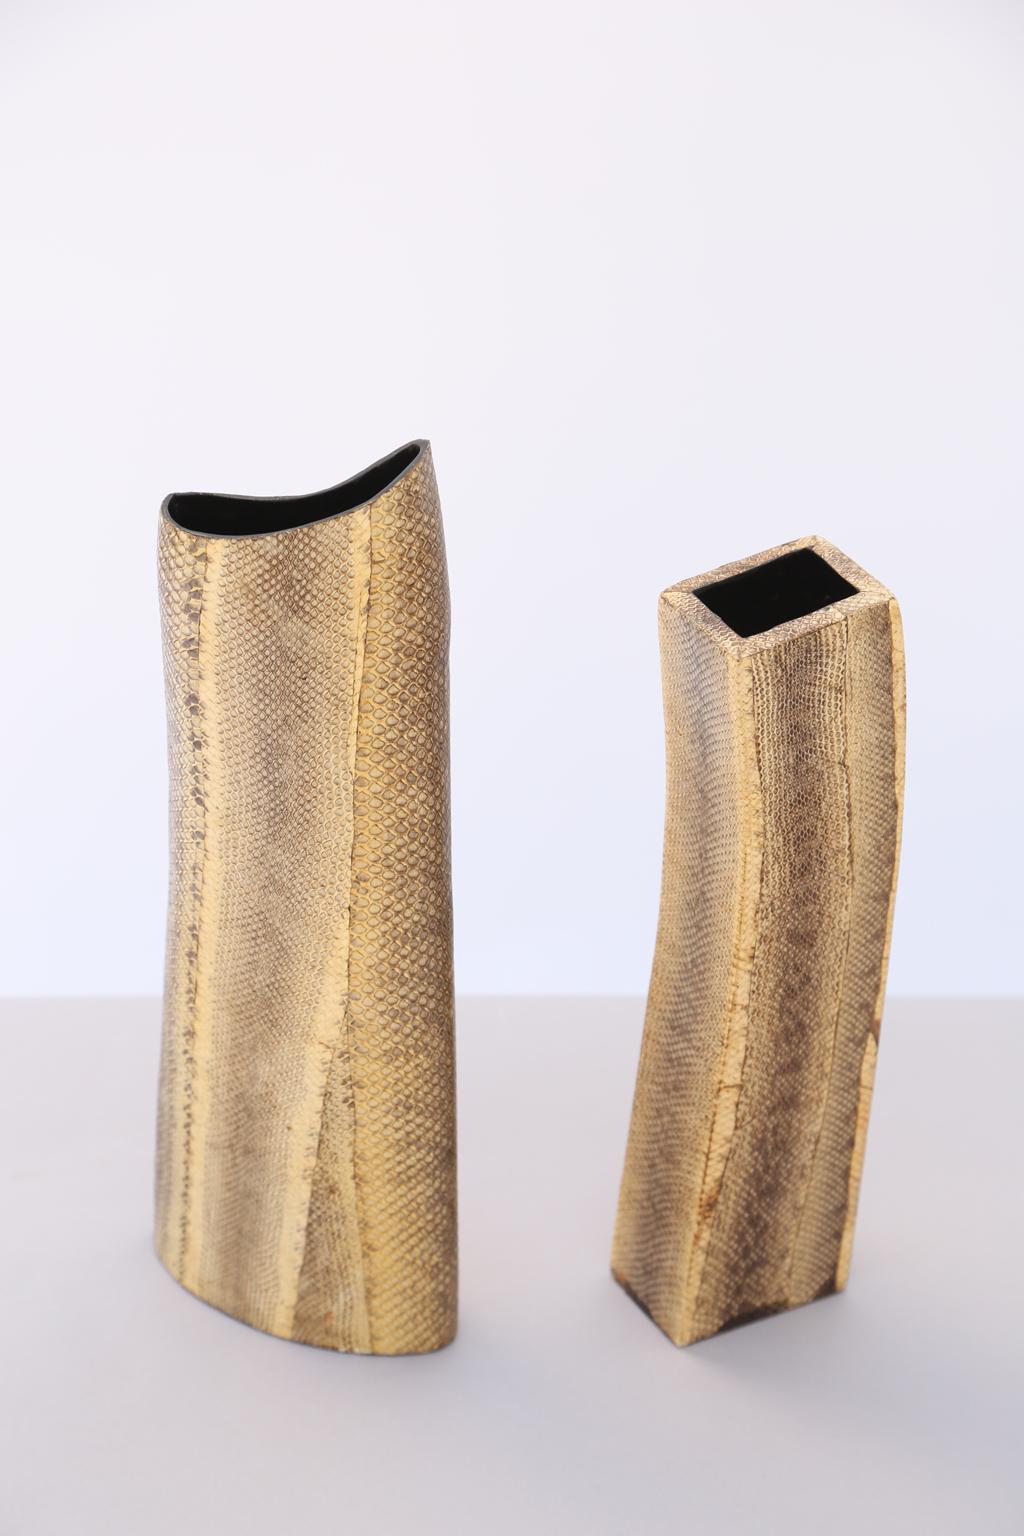 Pair of unusual vases, each freeform shape, clad in snakeskin by Ria and Yiouri Augousti. Rectangular vase measures approximately 12.75